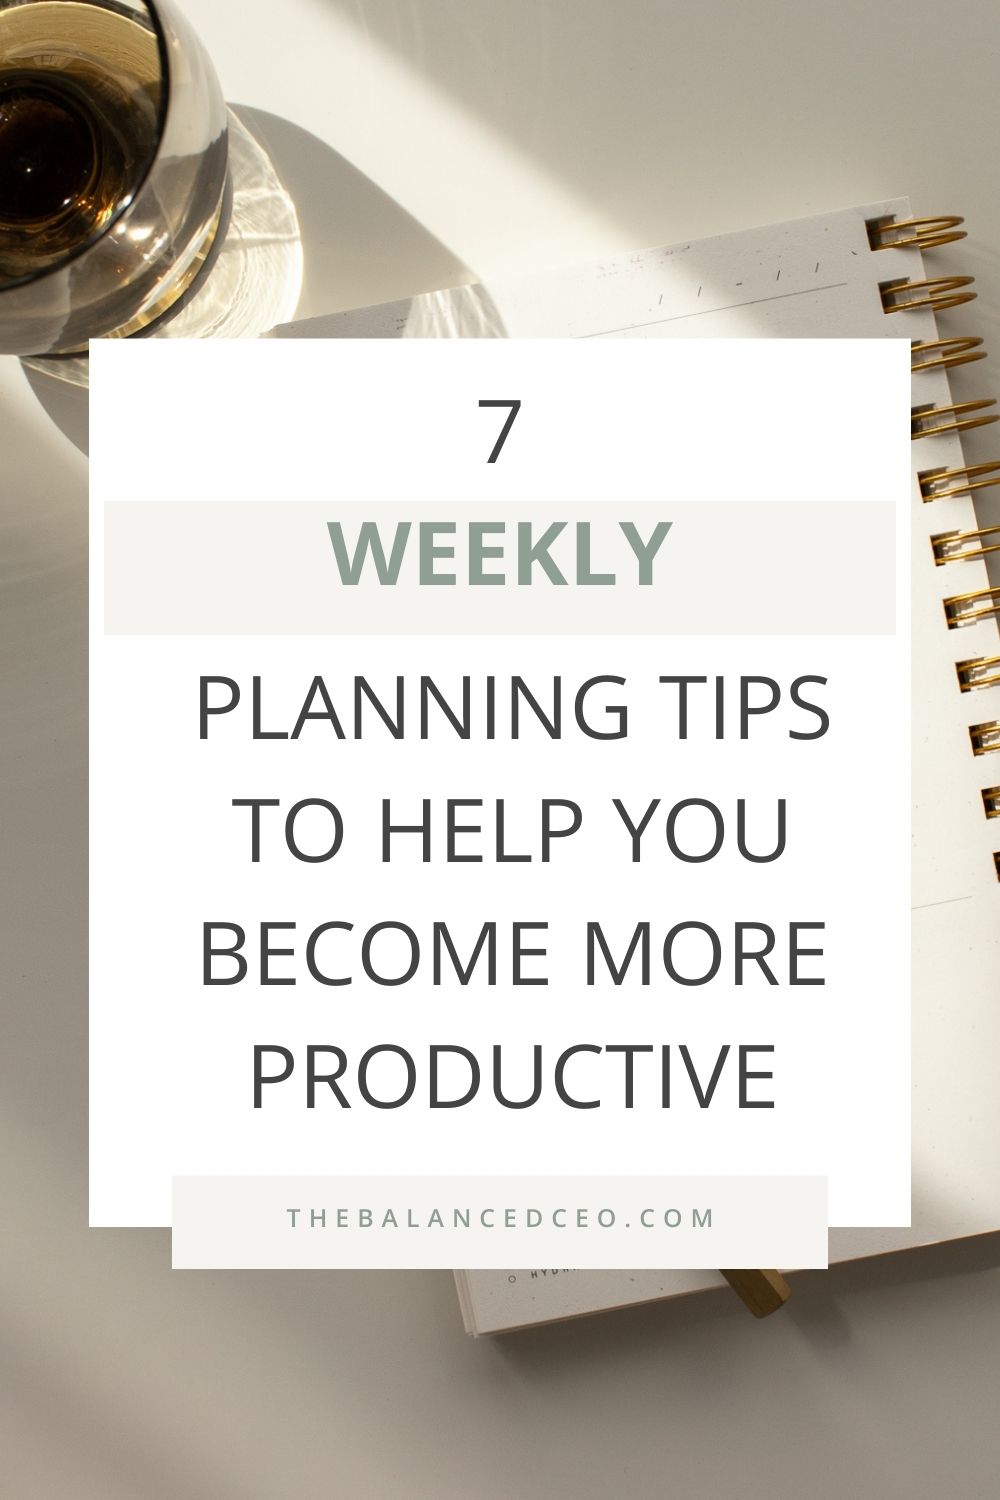 7 Weekly Planning Tips to Help You Become More Productive